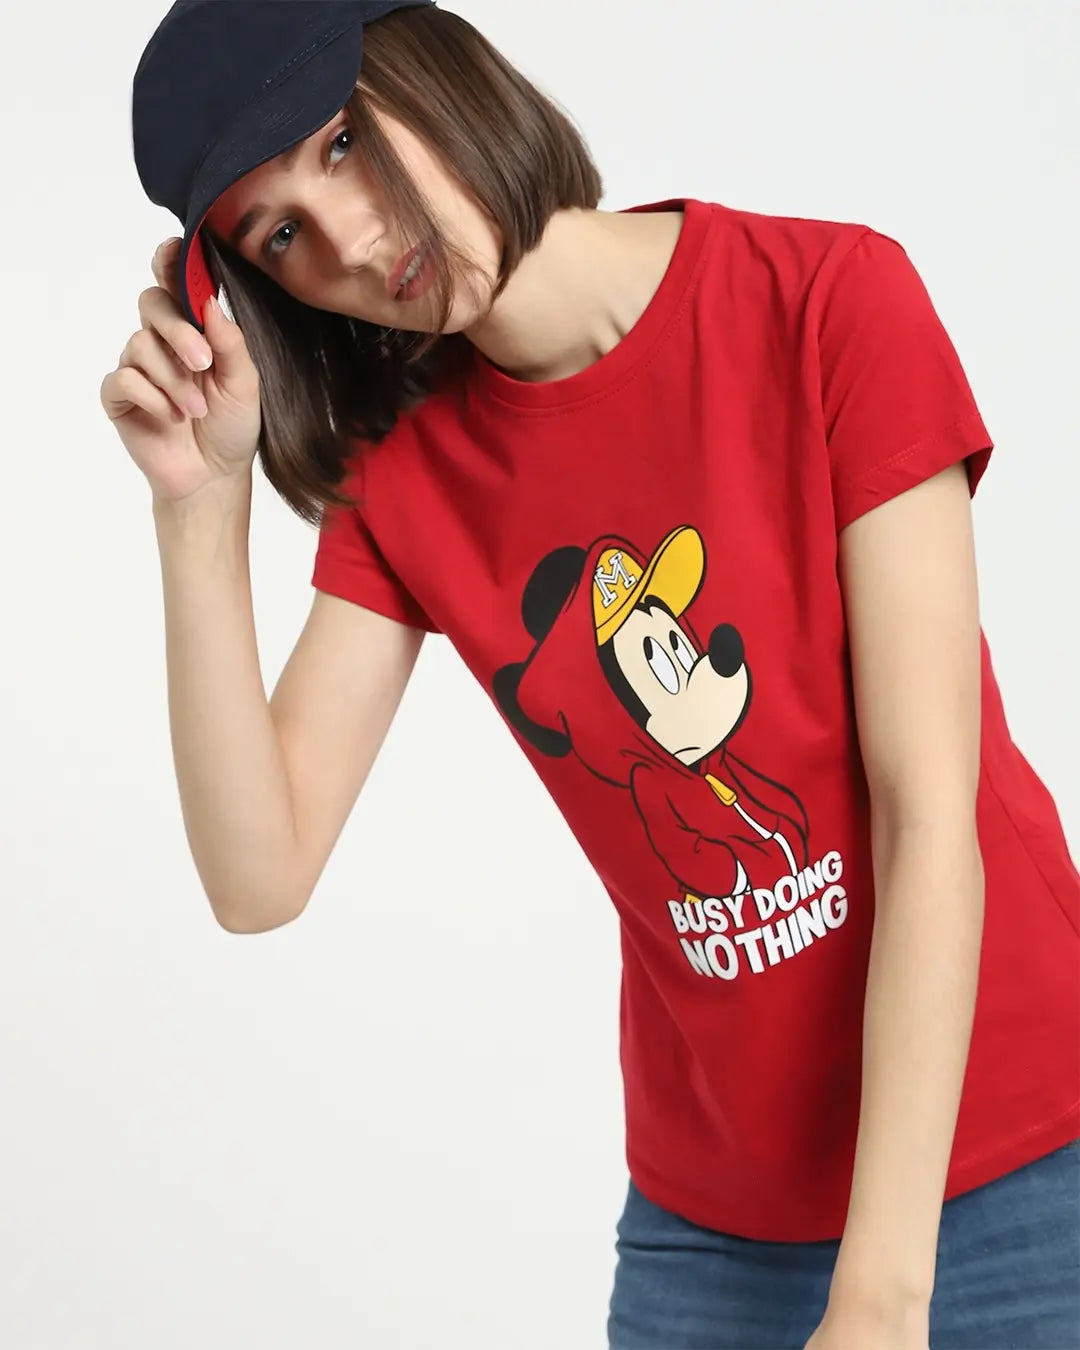 Women's Red Busy Doing Nothing Slim Fit T-shirt